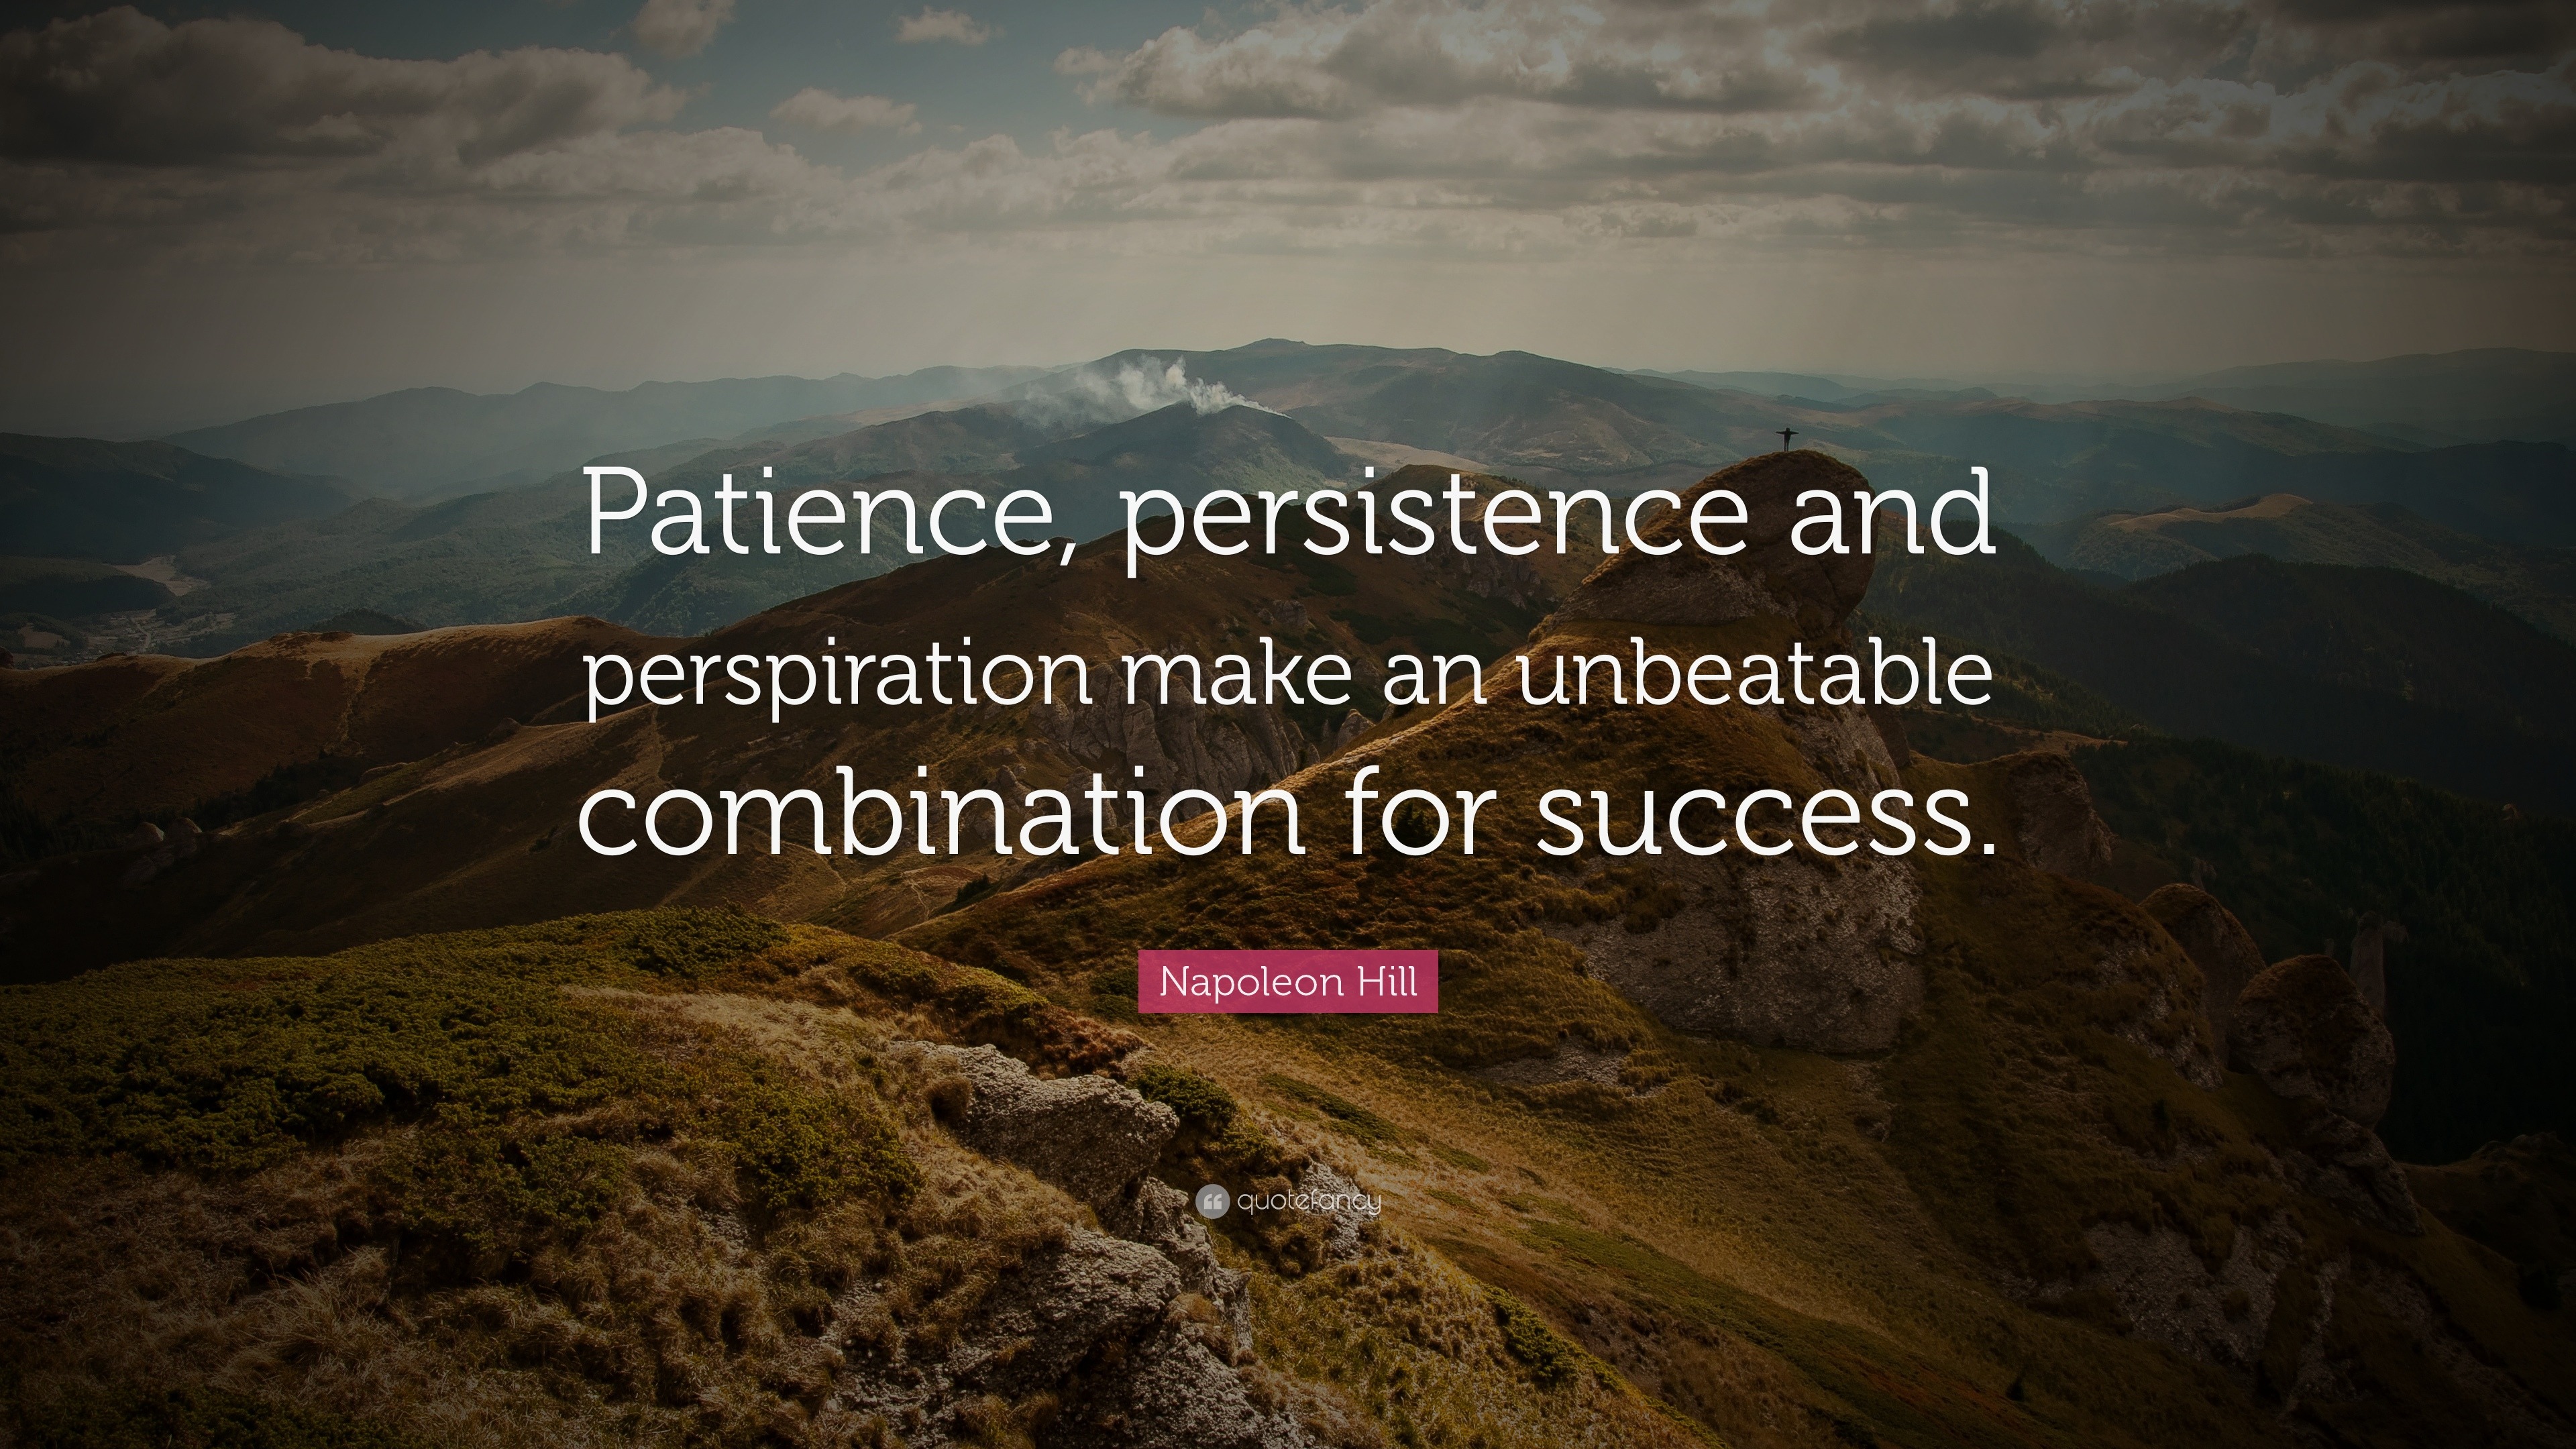 Napoleon Hill Quote: “Patience, persistence and perspiration make an